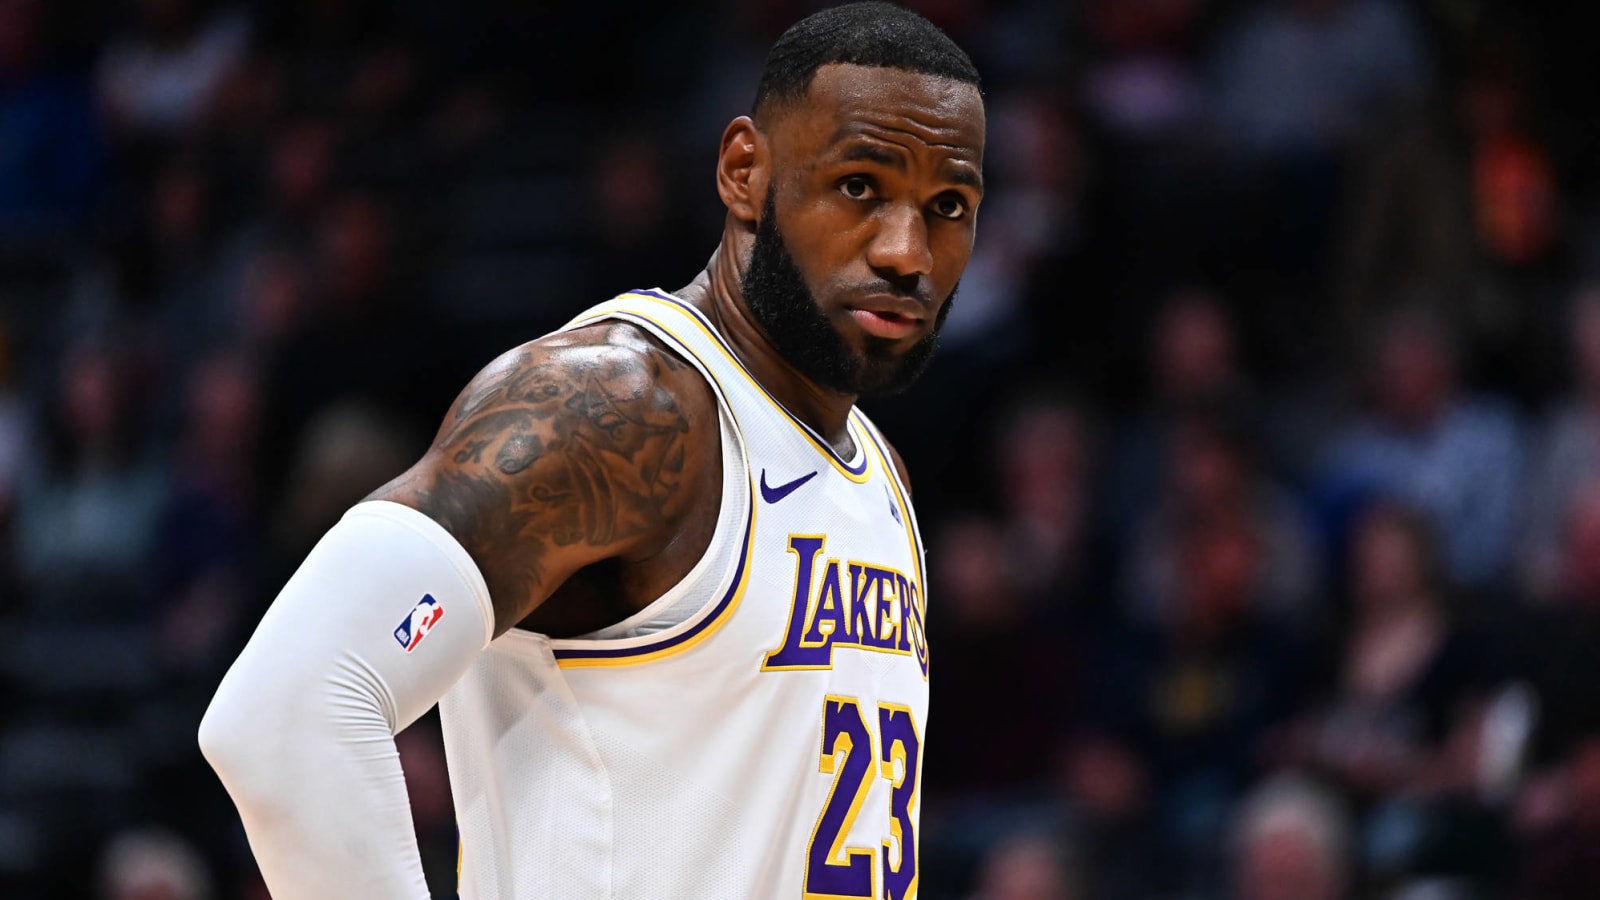 LeBron James explains his ridiculous travel that was not called